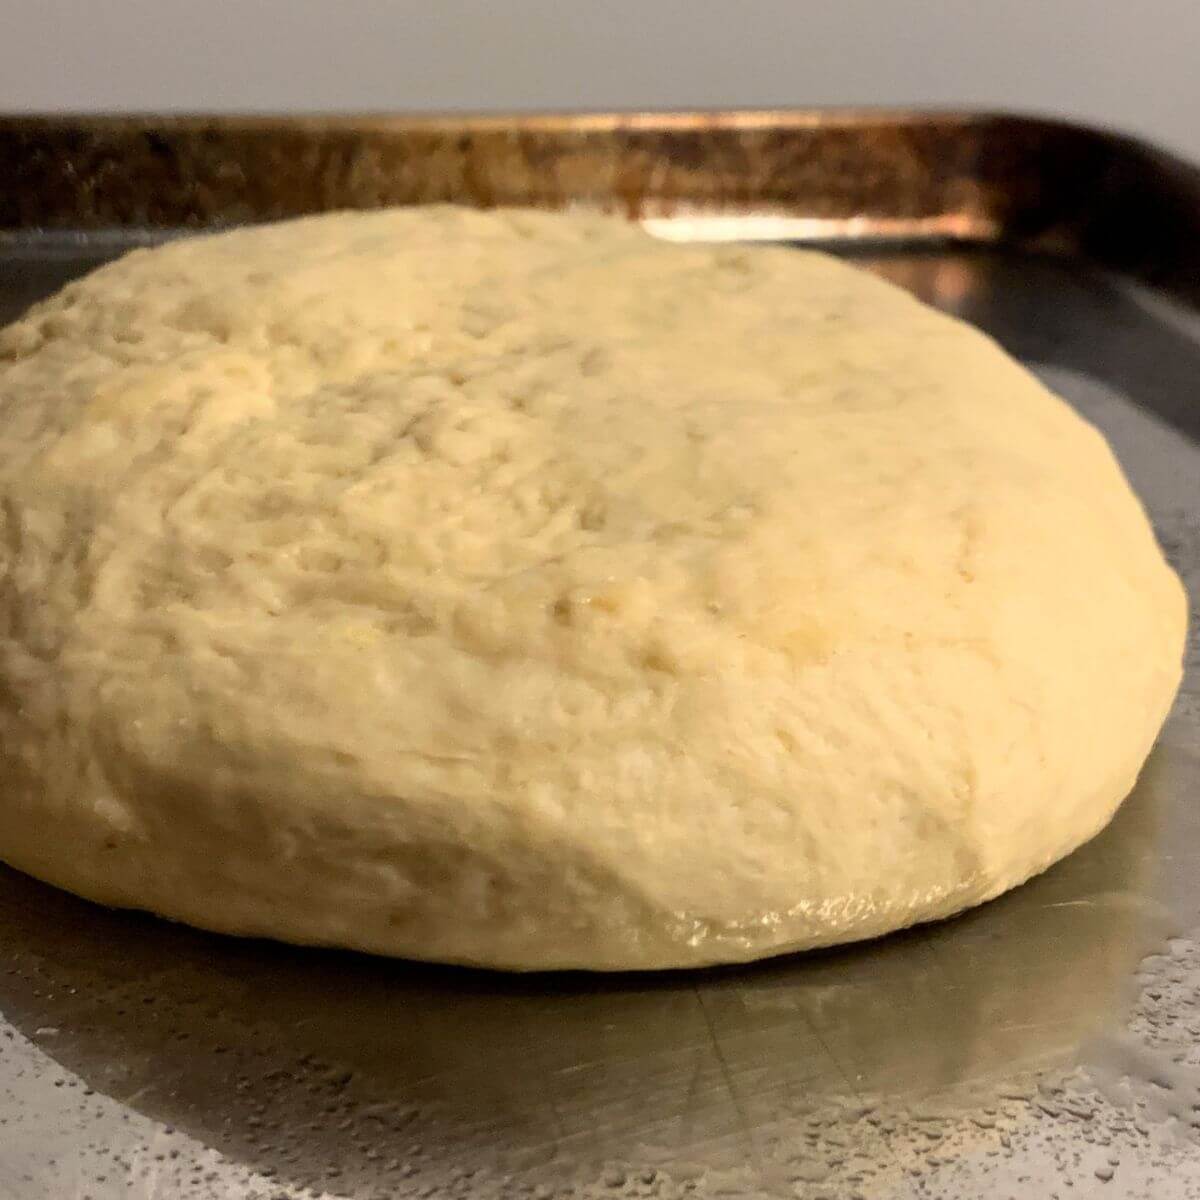 Side view of bread dough round risen on a stainless steel cookie sheet.